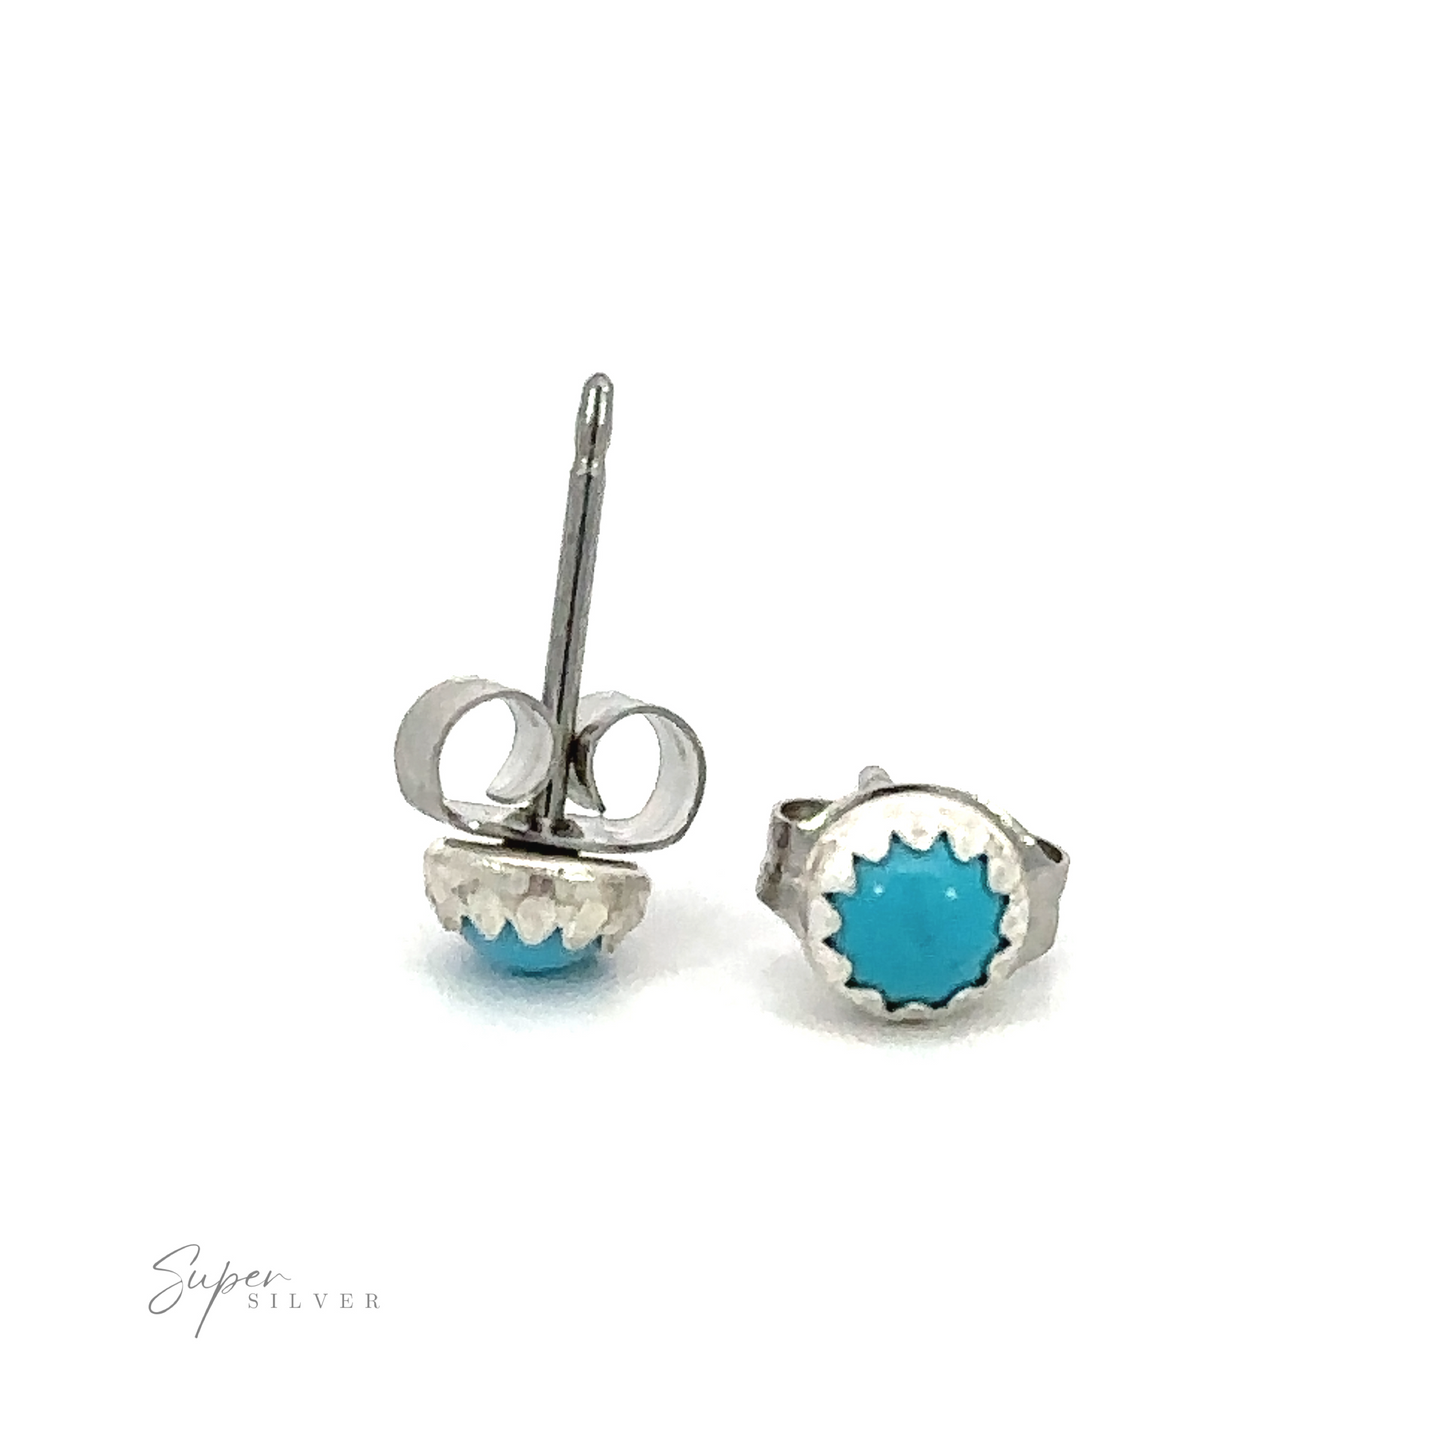 A pair of Circular Turquoise Studs on a white background, adding a minimalist touch.